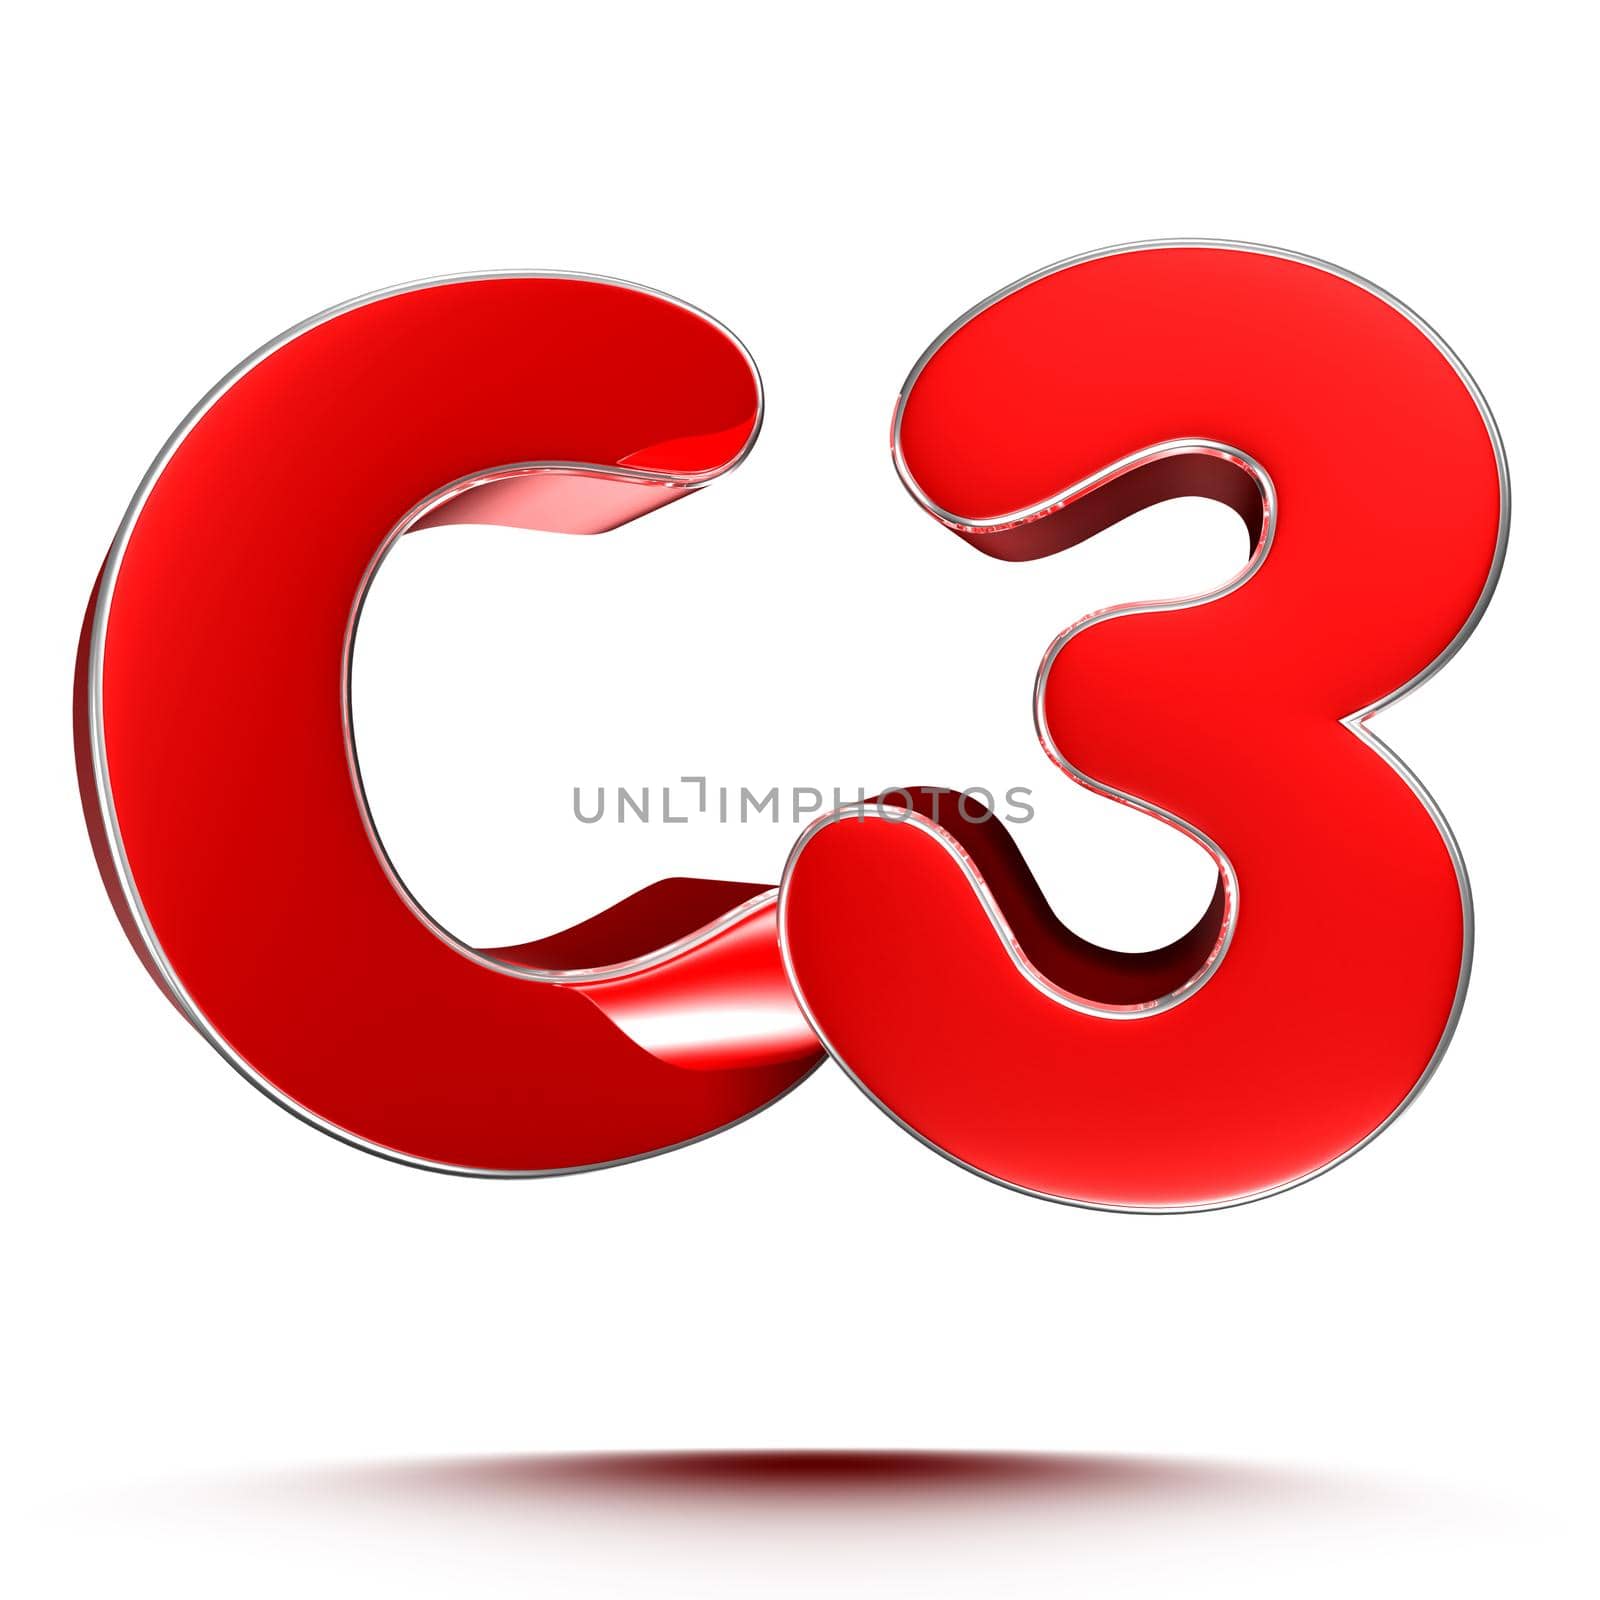 C3 red 3D illustration on white background with clipping path.